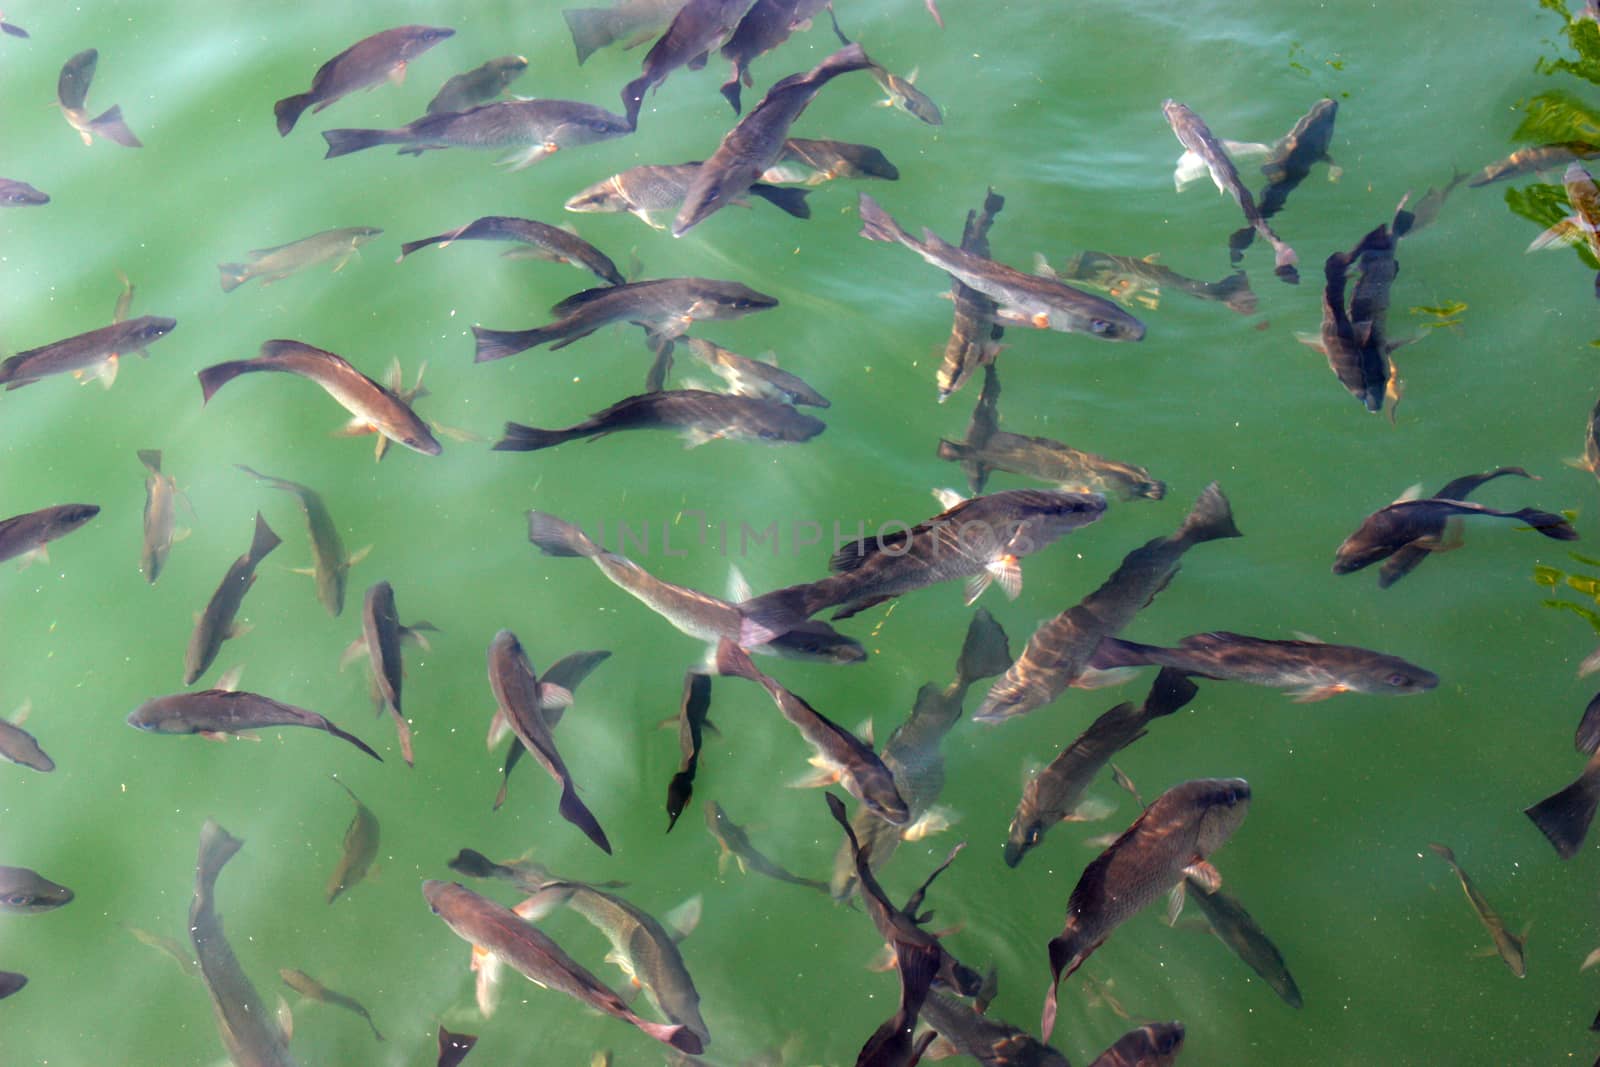 Many large fish swimming in clear river.